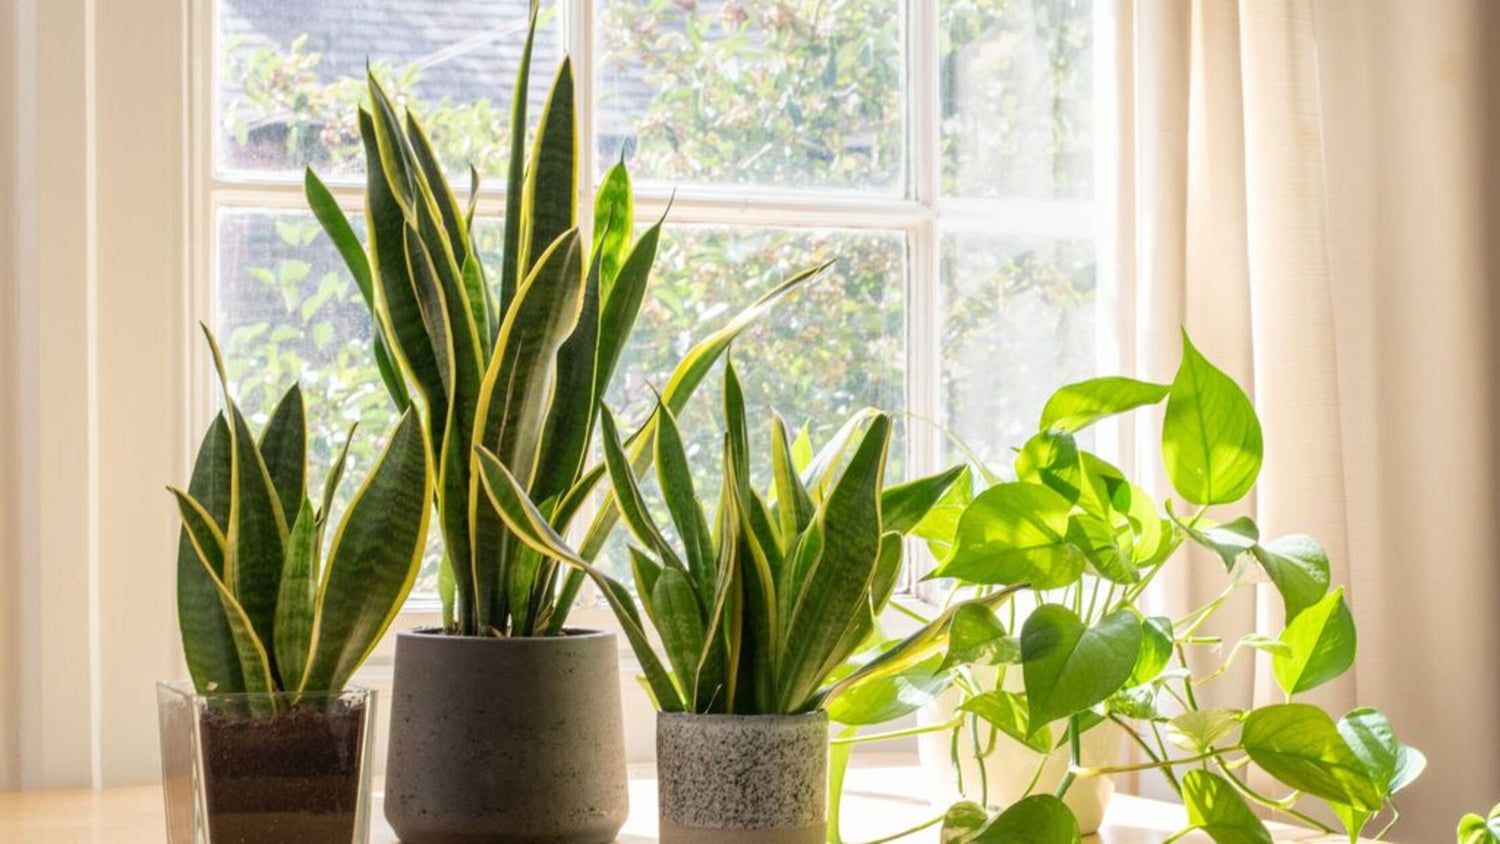 Springtime Serenity: Gift An Indoor Oasis With Elegant Large Plants